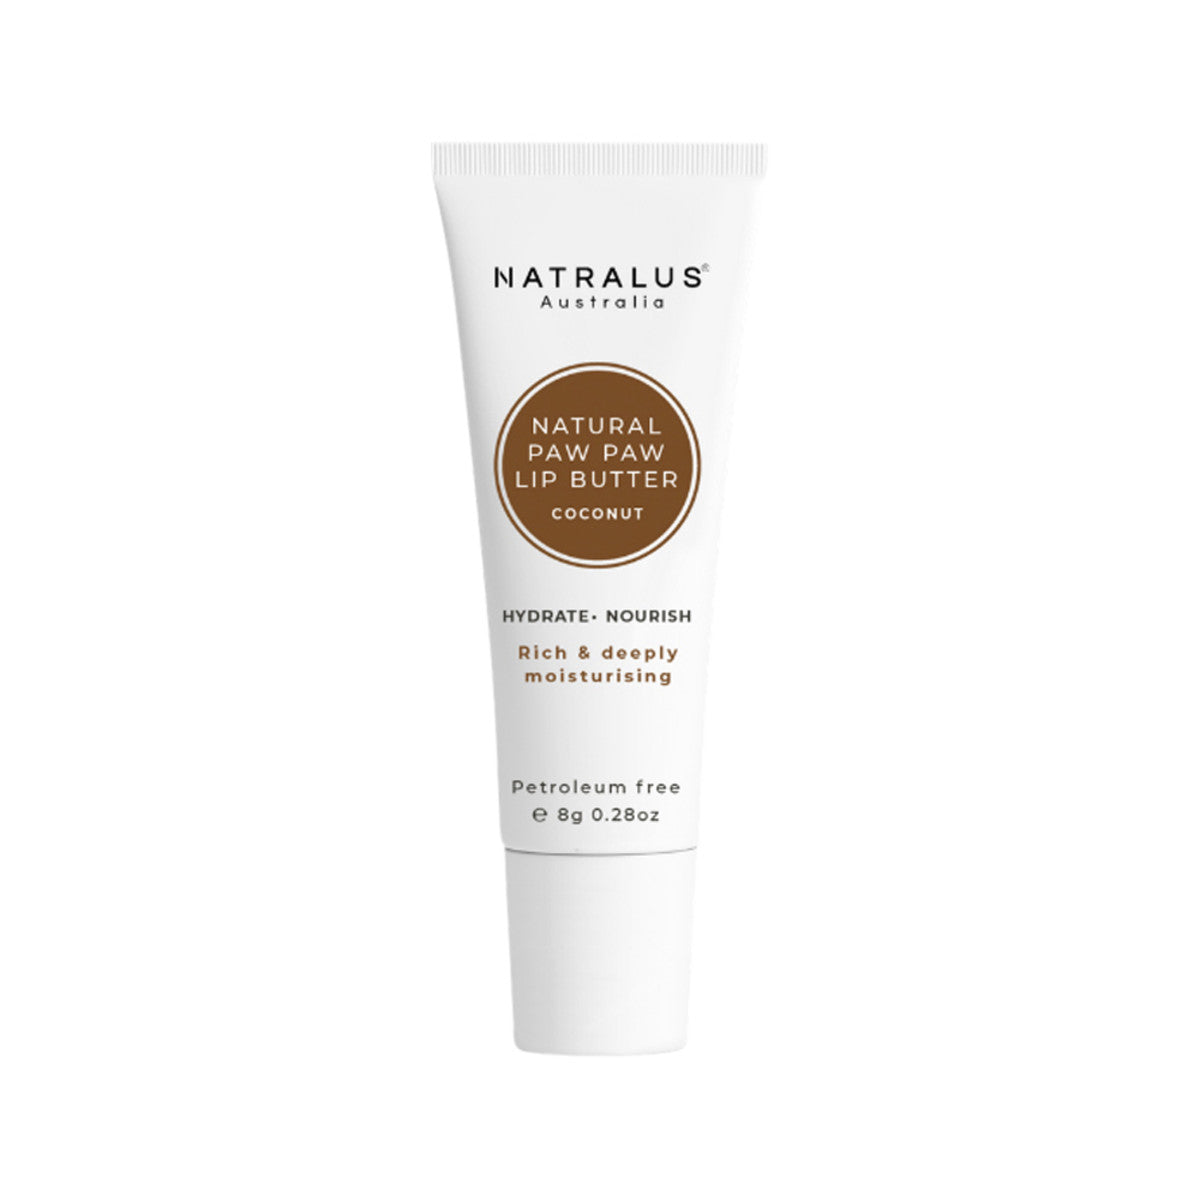 Natralus - Natural Paw Paw Lip Butter (Coconut)